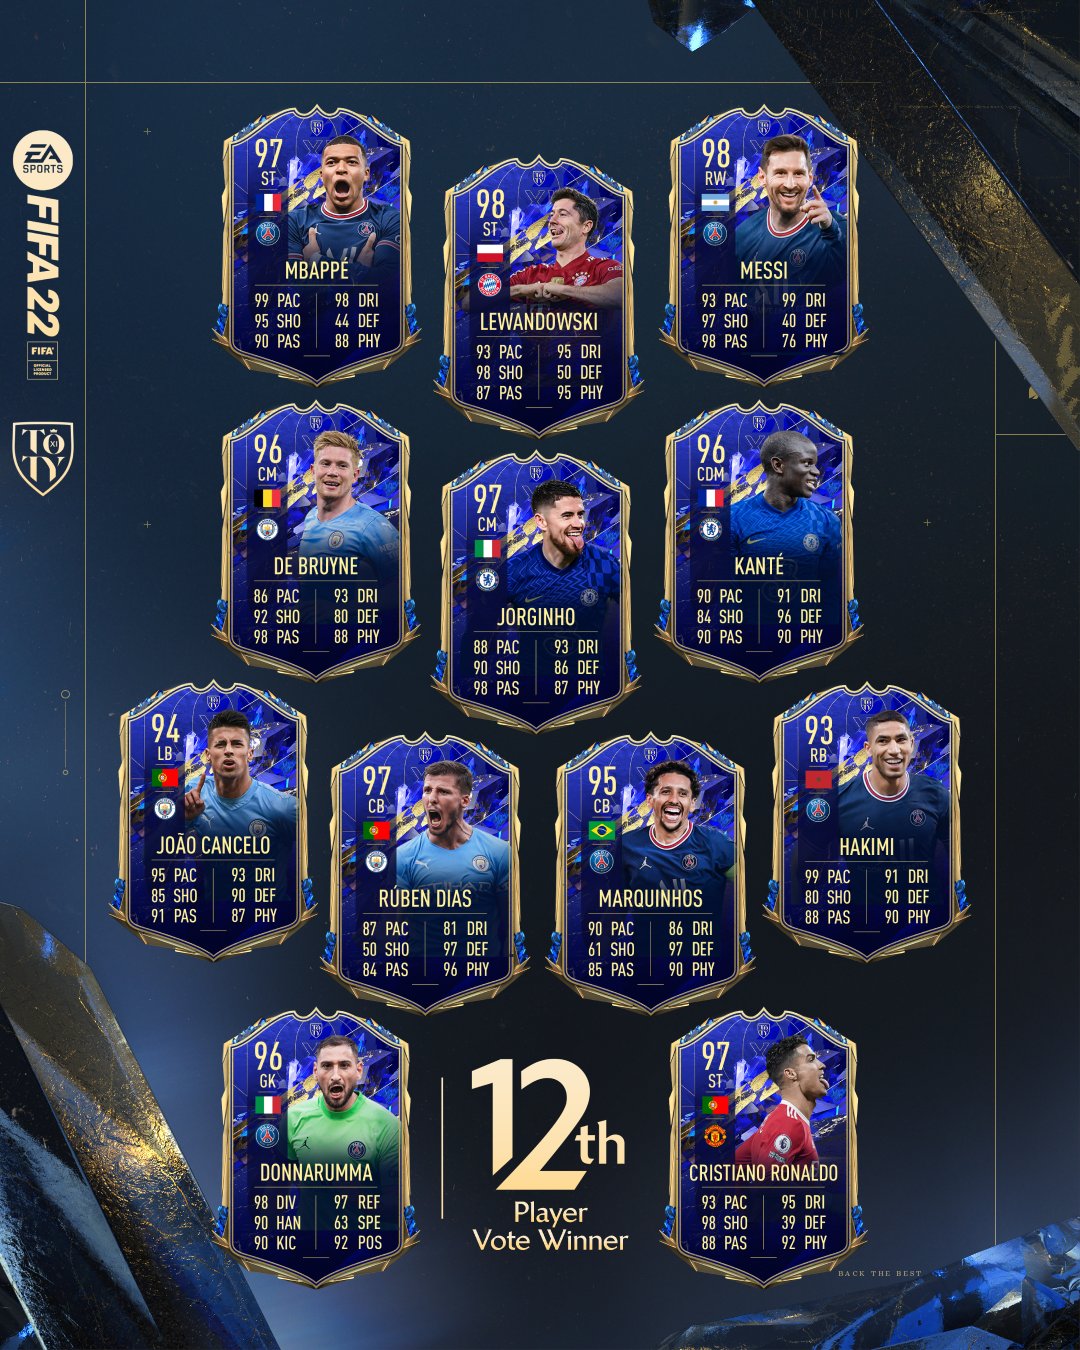 Subjective Painting Mangle EA SPORTS FIFA on Twitter: "As voted by you, introducing your #TOTY 12th  Man! 💪 #FIFA22 https://t.co/q74KVug25n" / Twitter